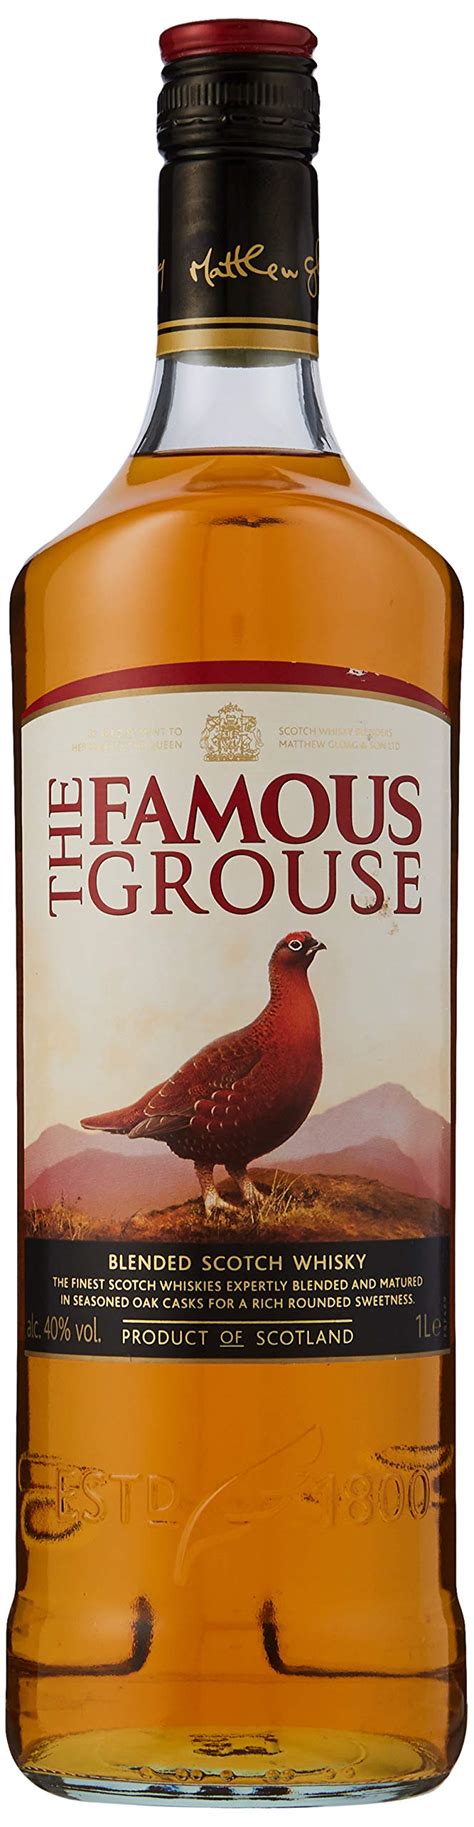 The Famous Grouse Finest Blended Scotch Whisky 1L Buy Online In UAE